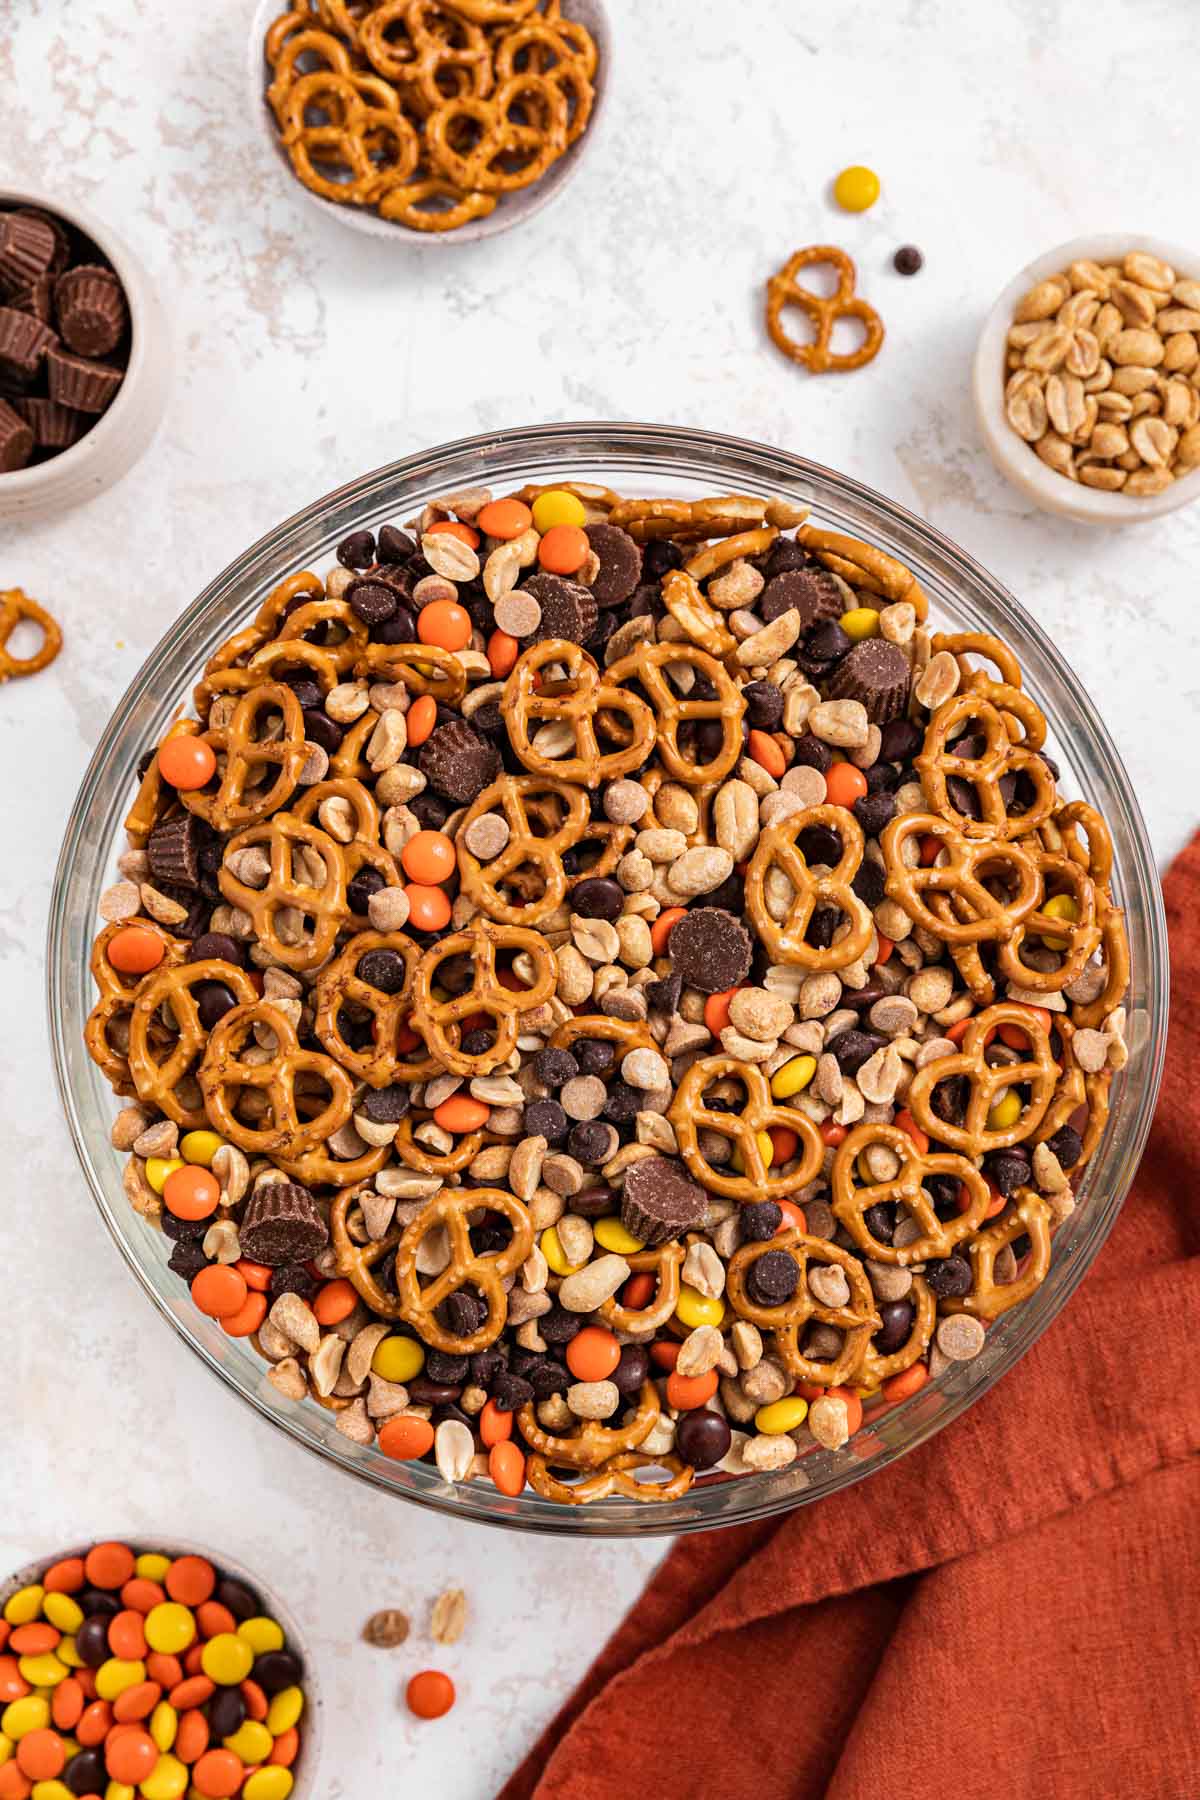 Chocolate Peanut Butter Trail Mix ingredients in large bowl combined